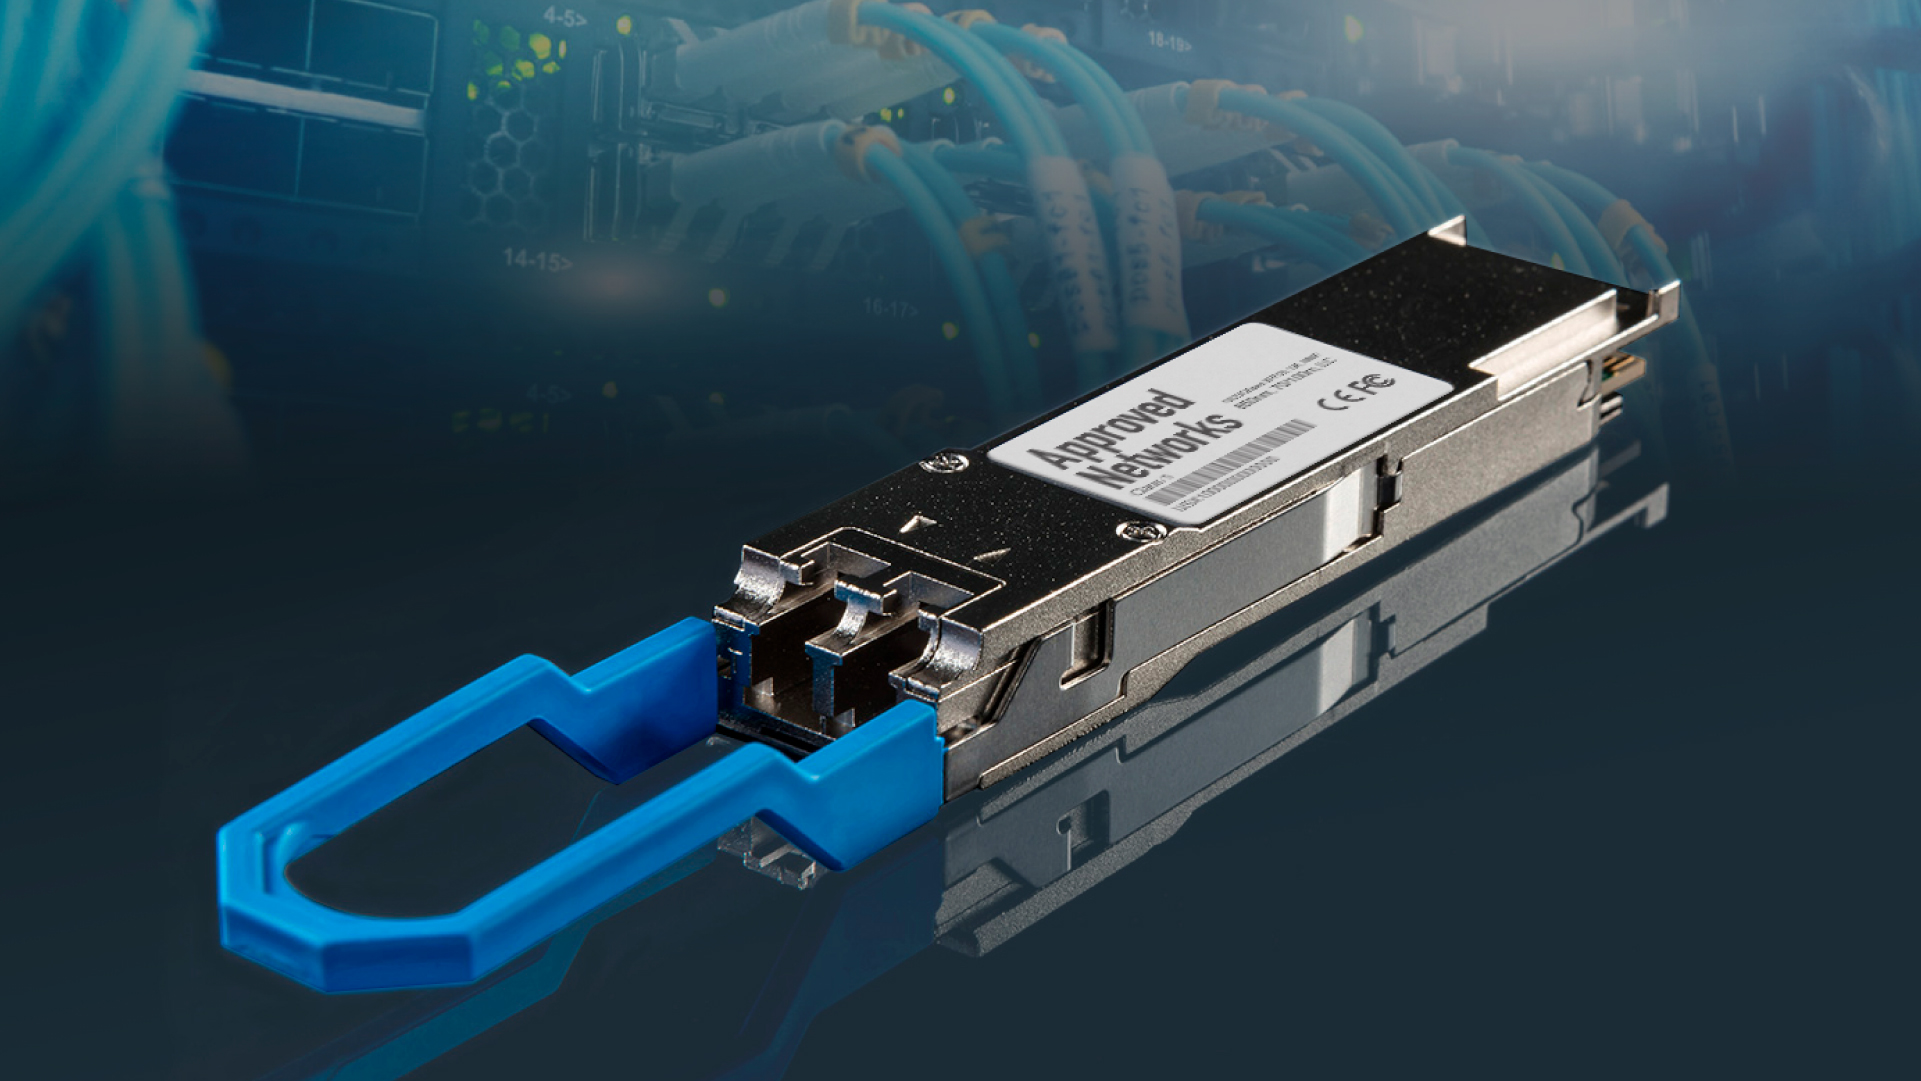 a 200g fiber optics transceiver by approved networks on a data center background.